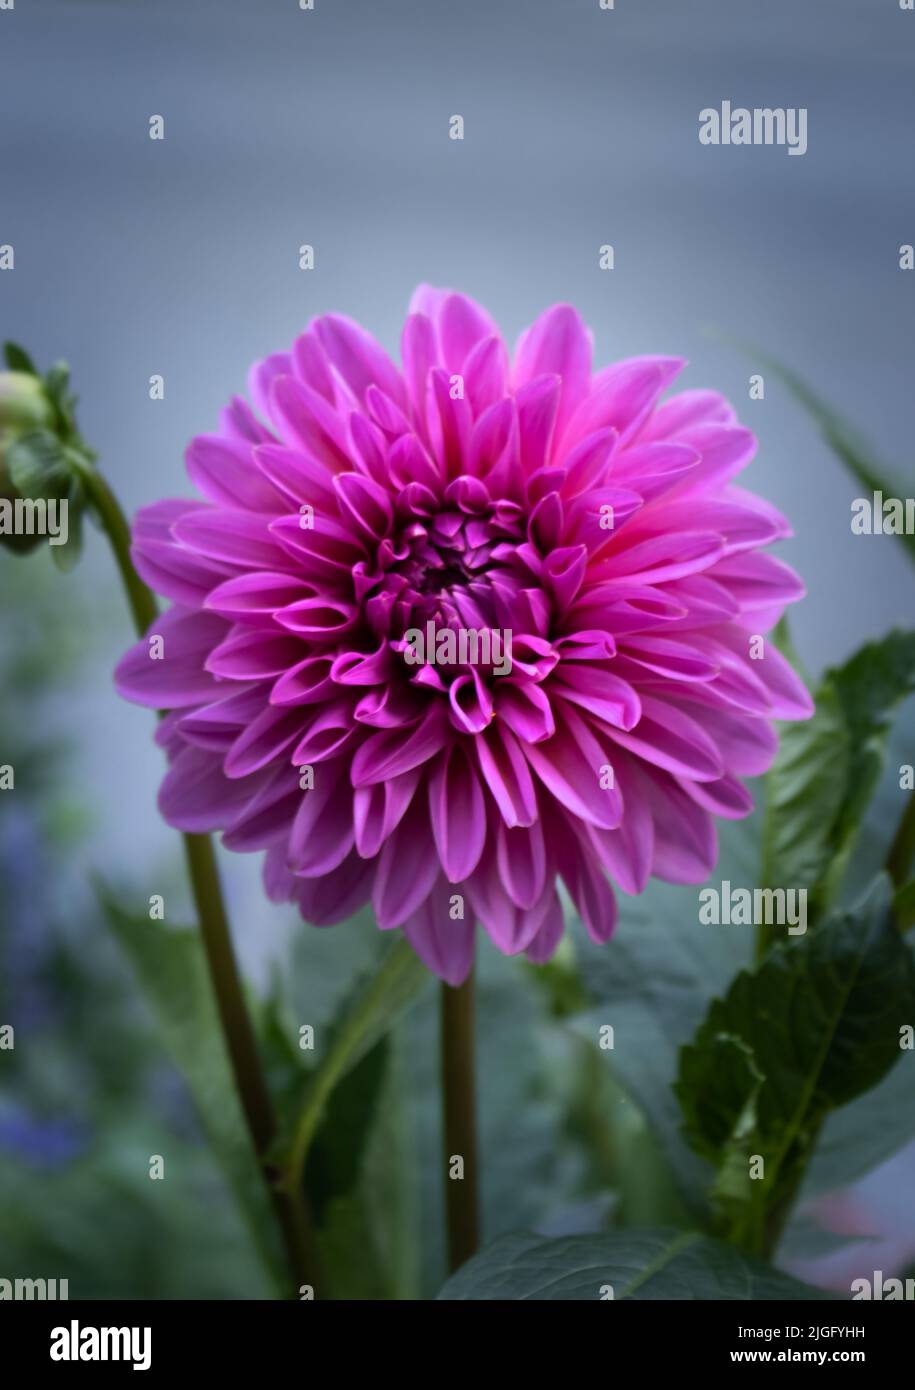 A Purple Dahlia flower, Dahlia pinnata, growing along the side of a road with street in background in spring or summer, Lancaster, Pennsylvania Stock Photo